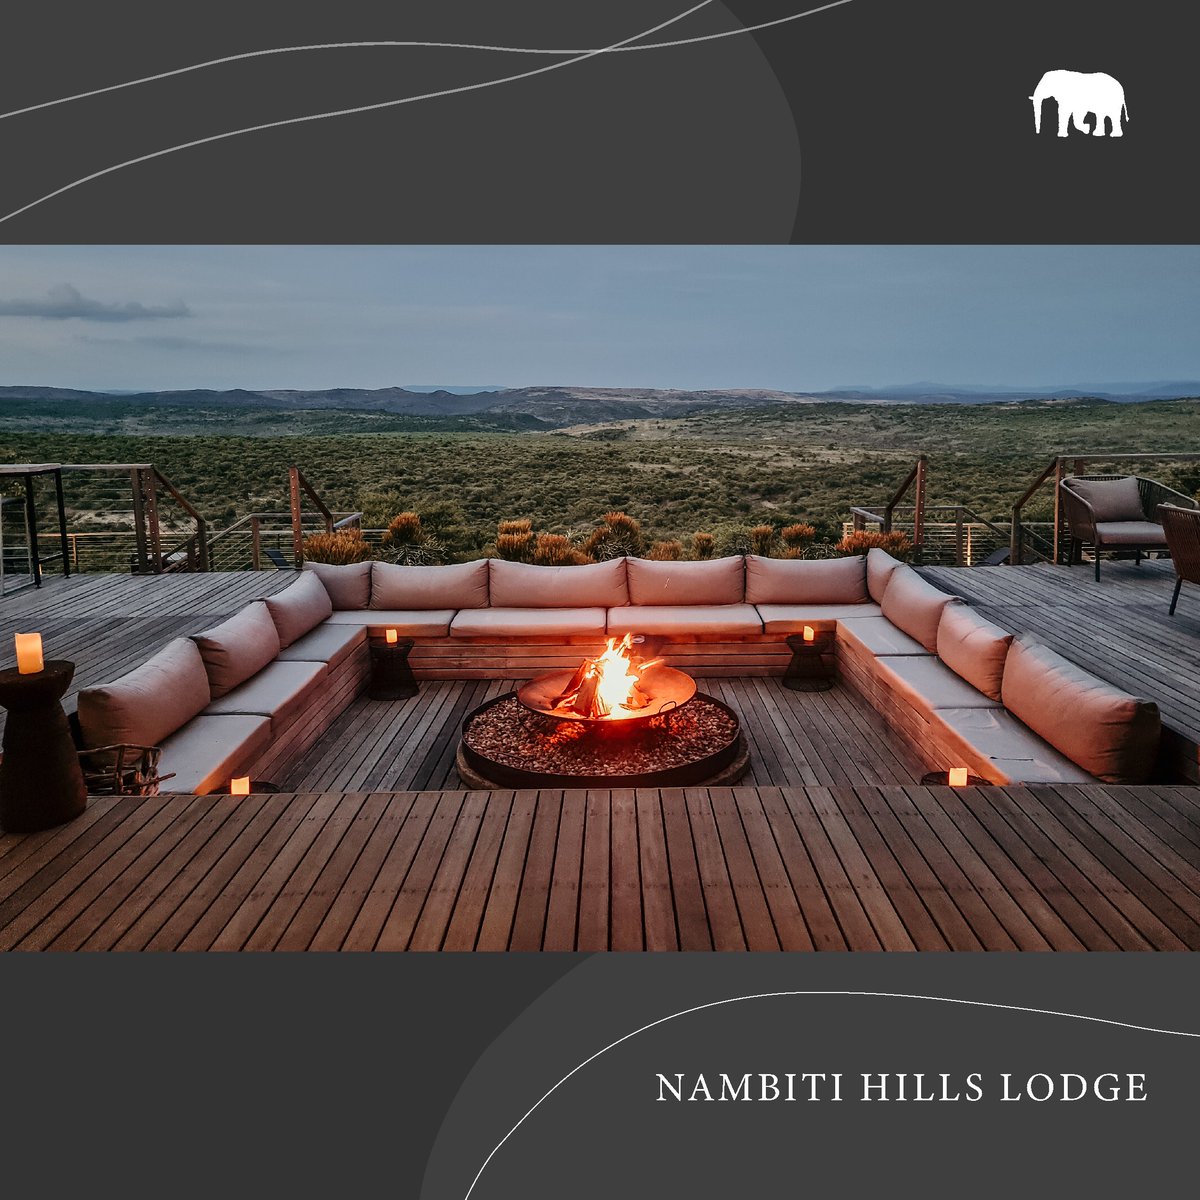 As you cosy up by the crackling fire, the panoramic views from Nambiti Hills Lodge create a mesmerising backdrop. The ever-changing colours of the sky, and the serenity of the surrounding landscapes create a symphony of beauty that will take your breath away.